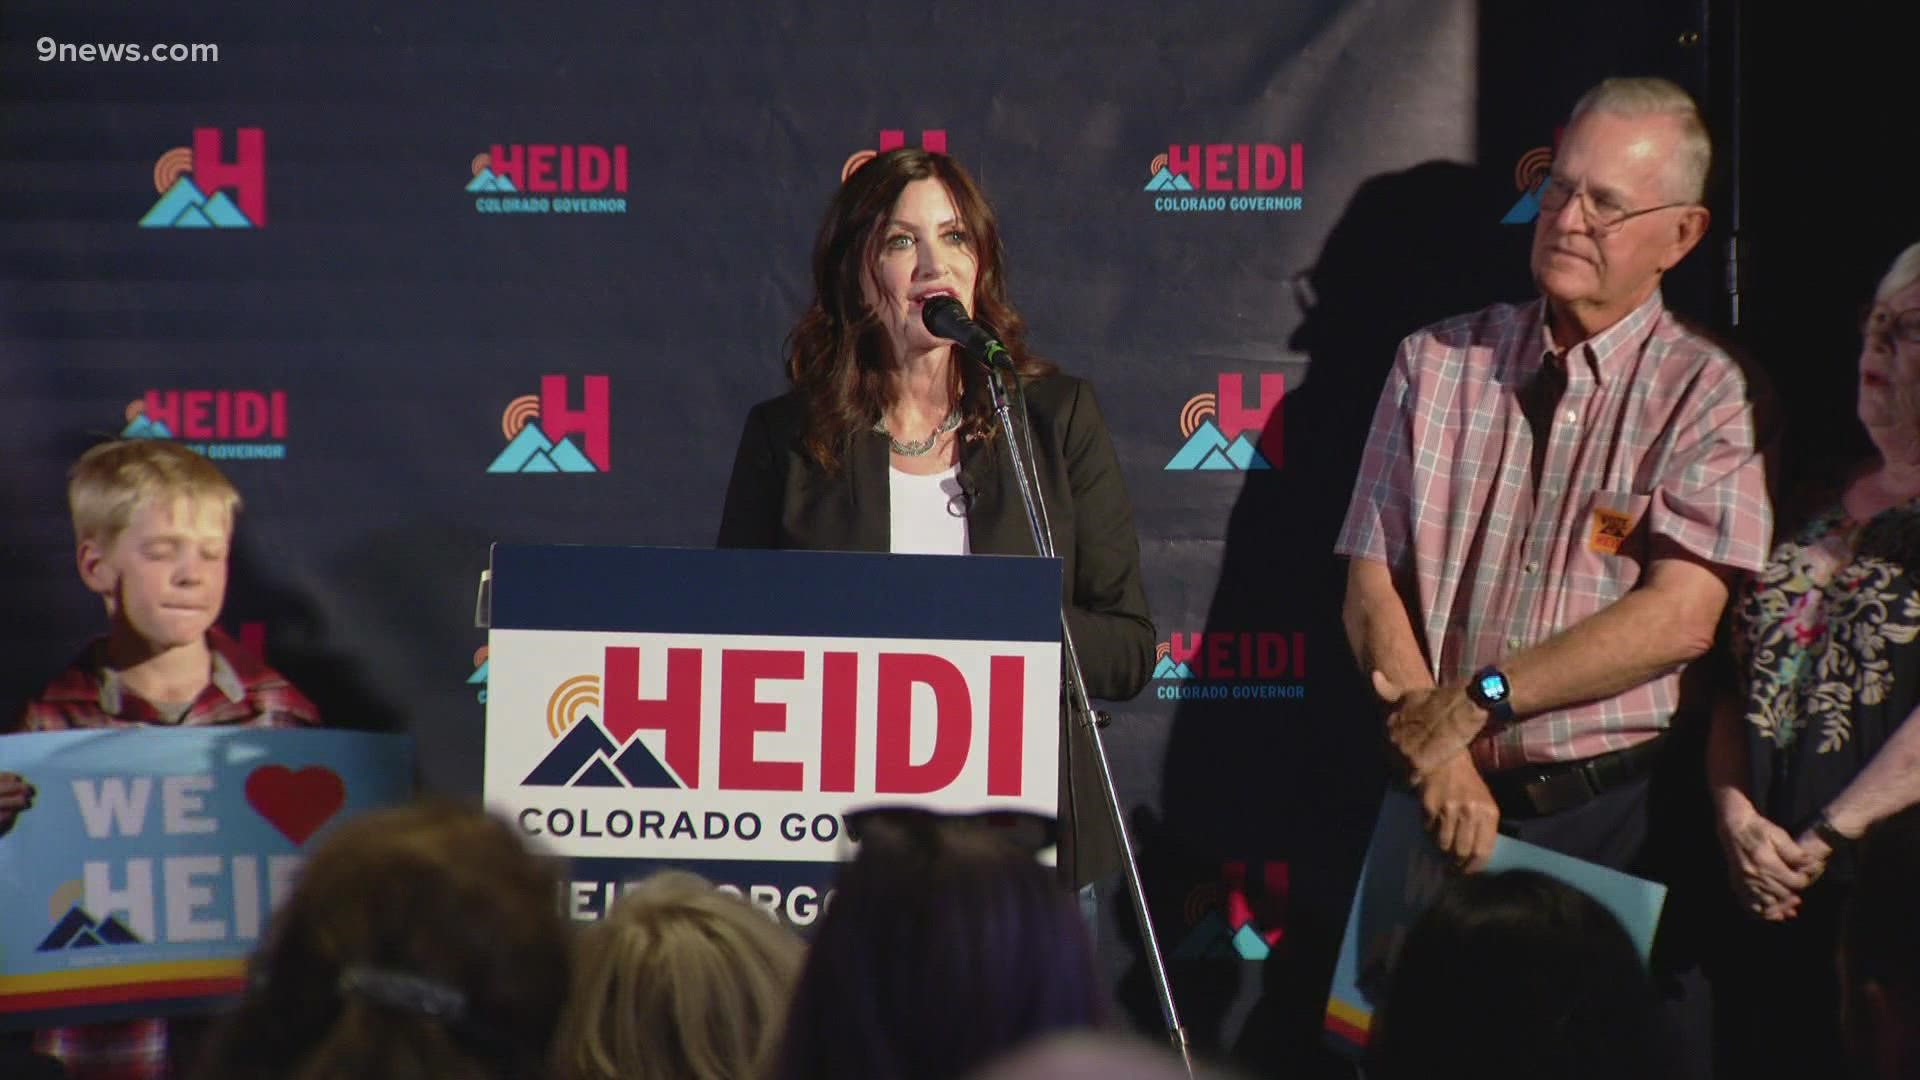 Heidi Ganahl, a leading Republican candidate for governor of Colorado, is heard at a meet-and-greet saying how she plans to win over unaffiliated voters.